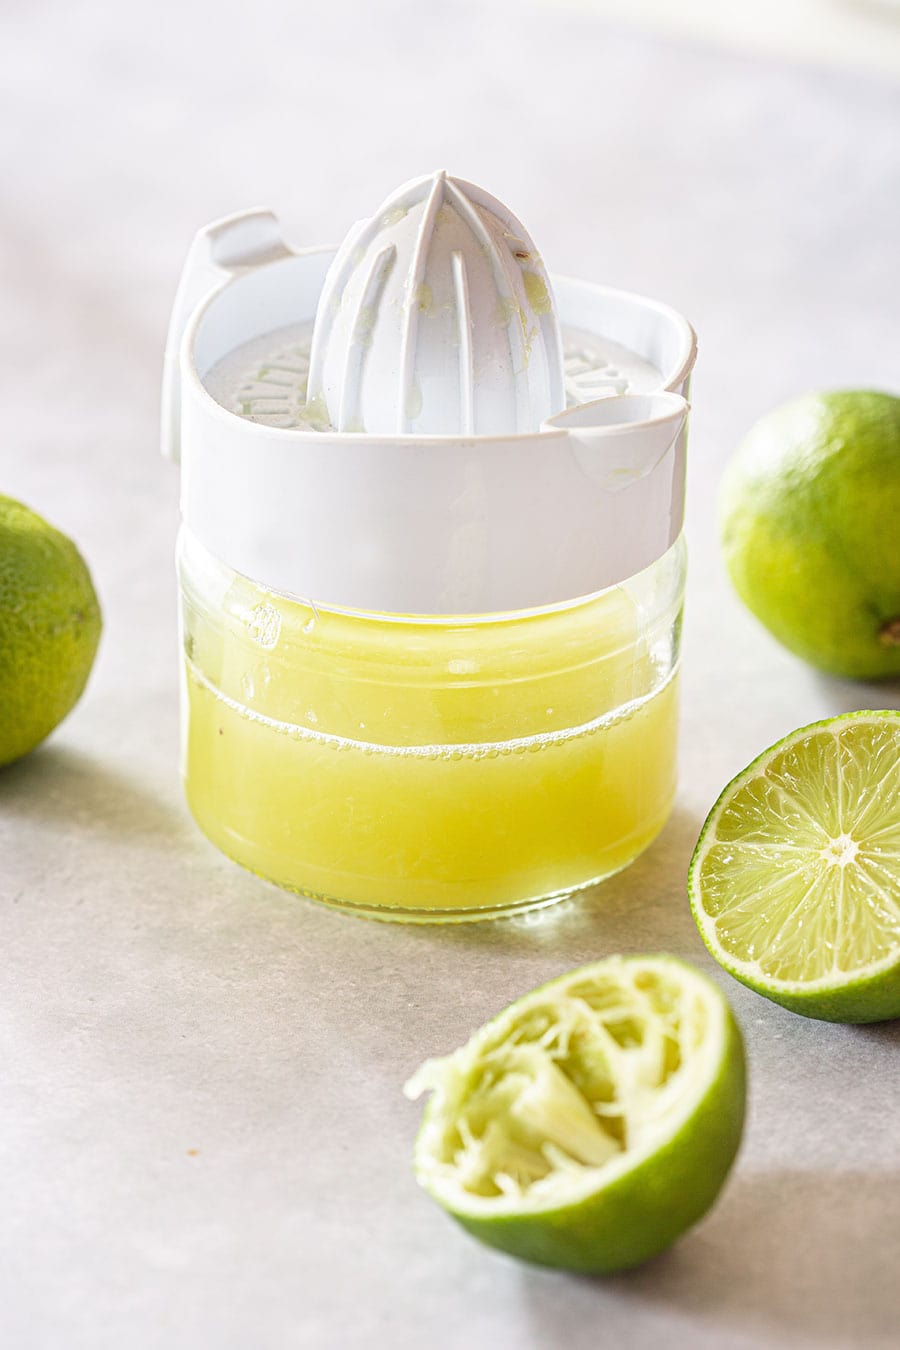 A citrus juiced with lime juice and some limes on the side.